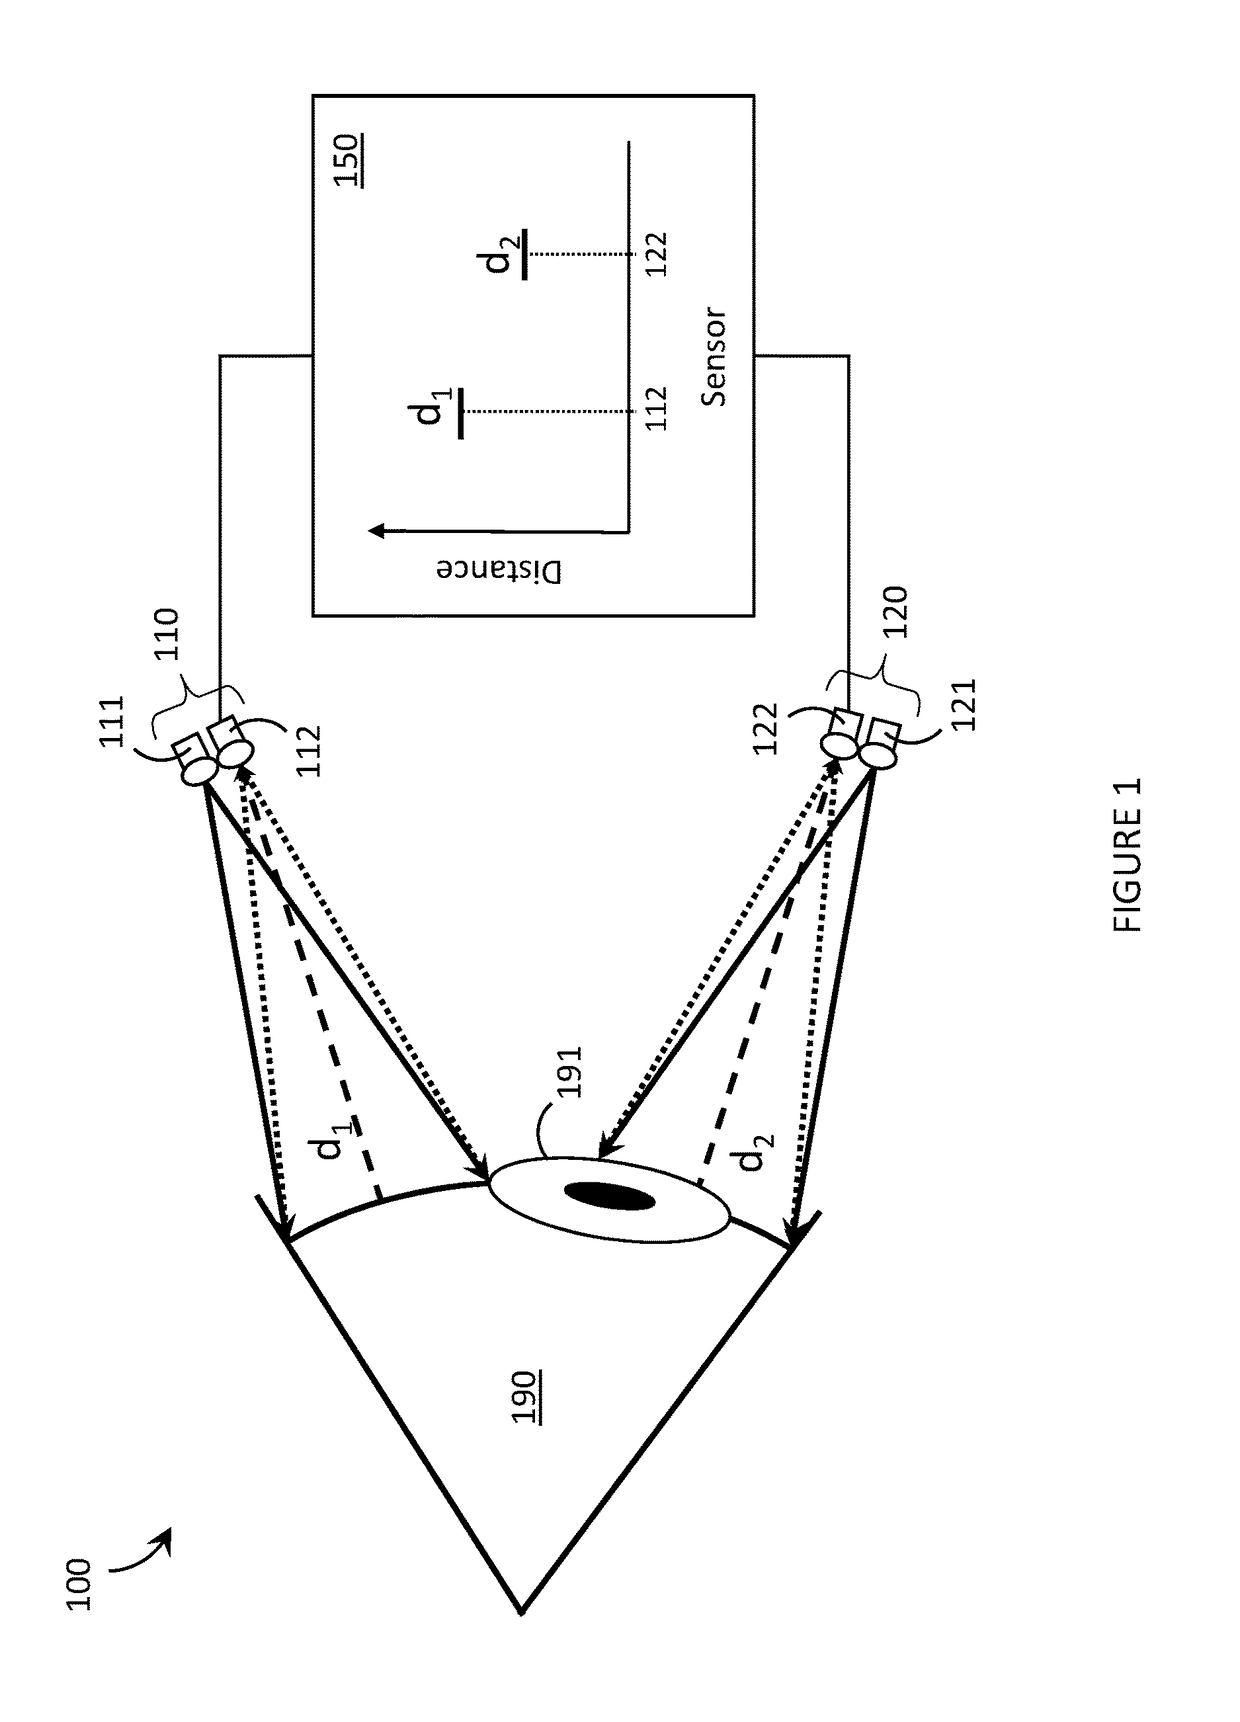 Systems, devices, and methods for proximity-based eye tracking